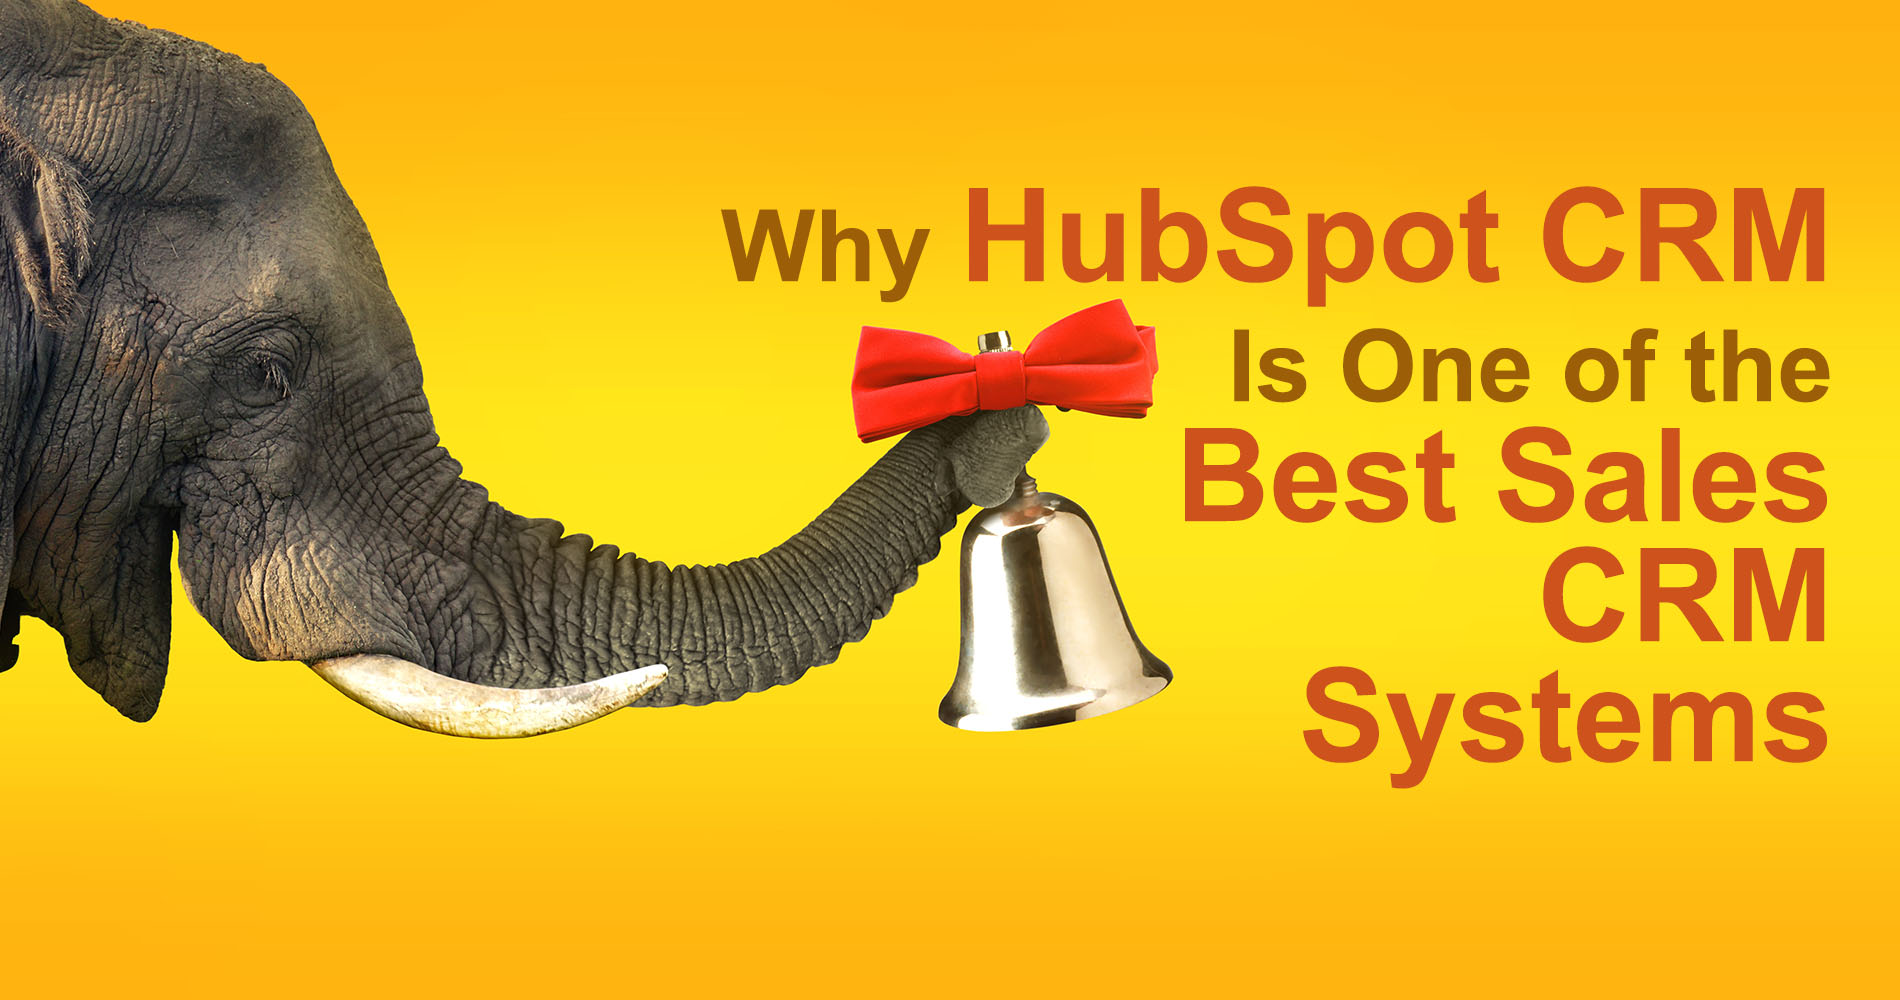 Why HubSpot CRM Is One of the Best Sales CRM Systems